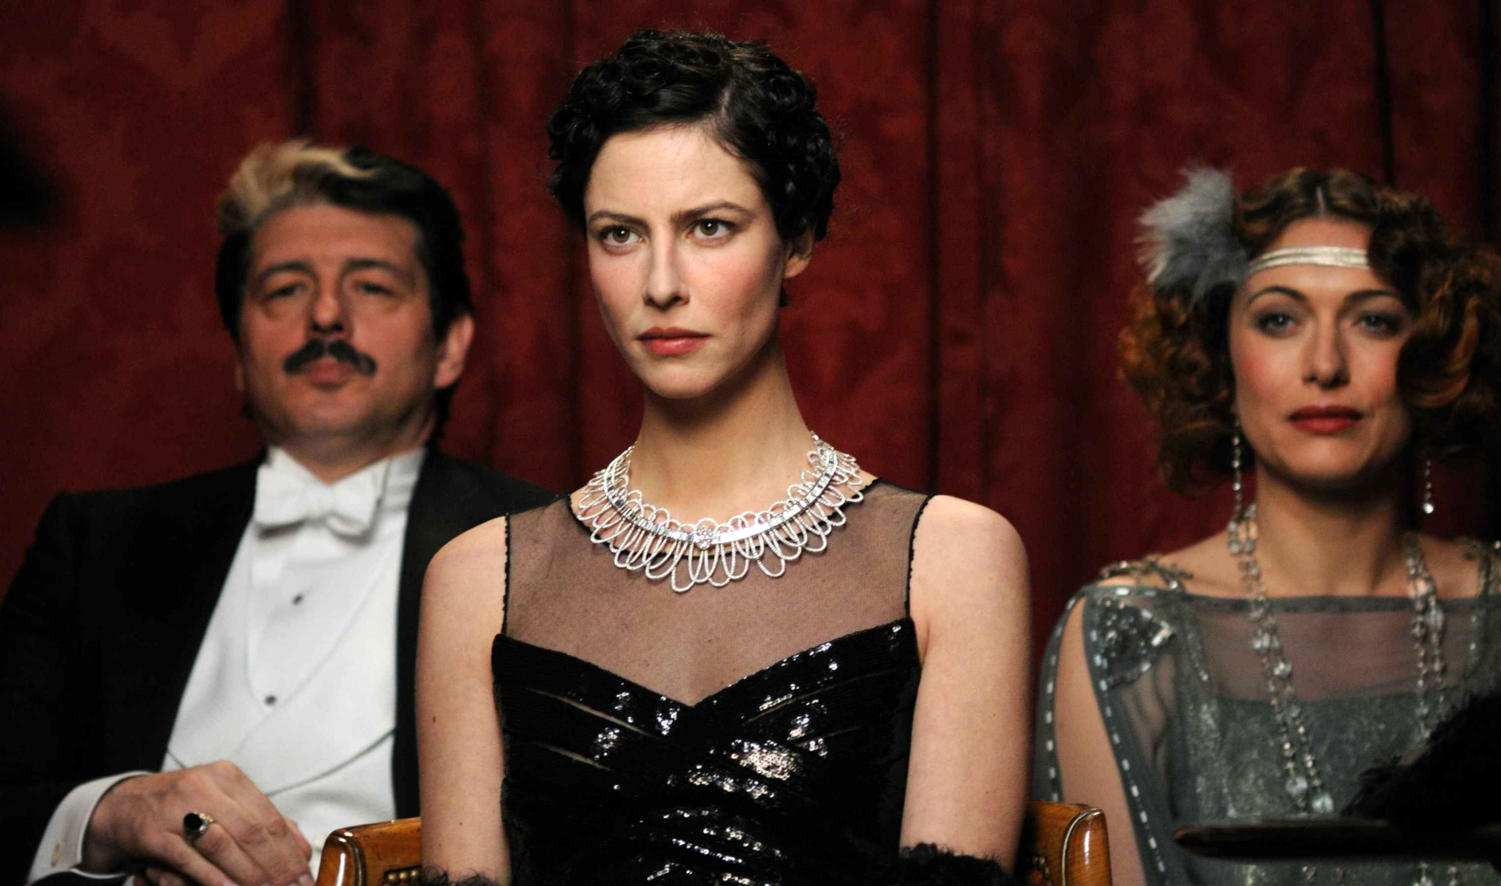 Anna Mouglalis as Coco Chanel, wearing the gown Chanel made famous. 